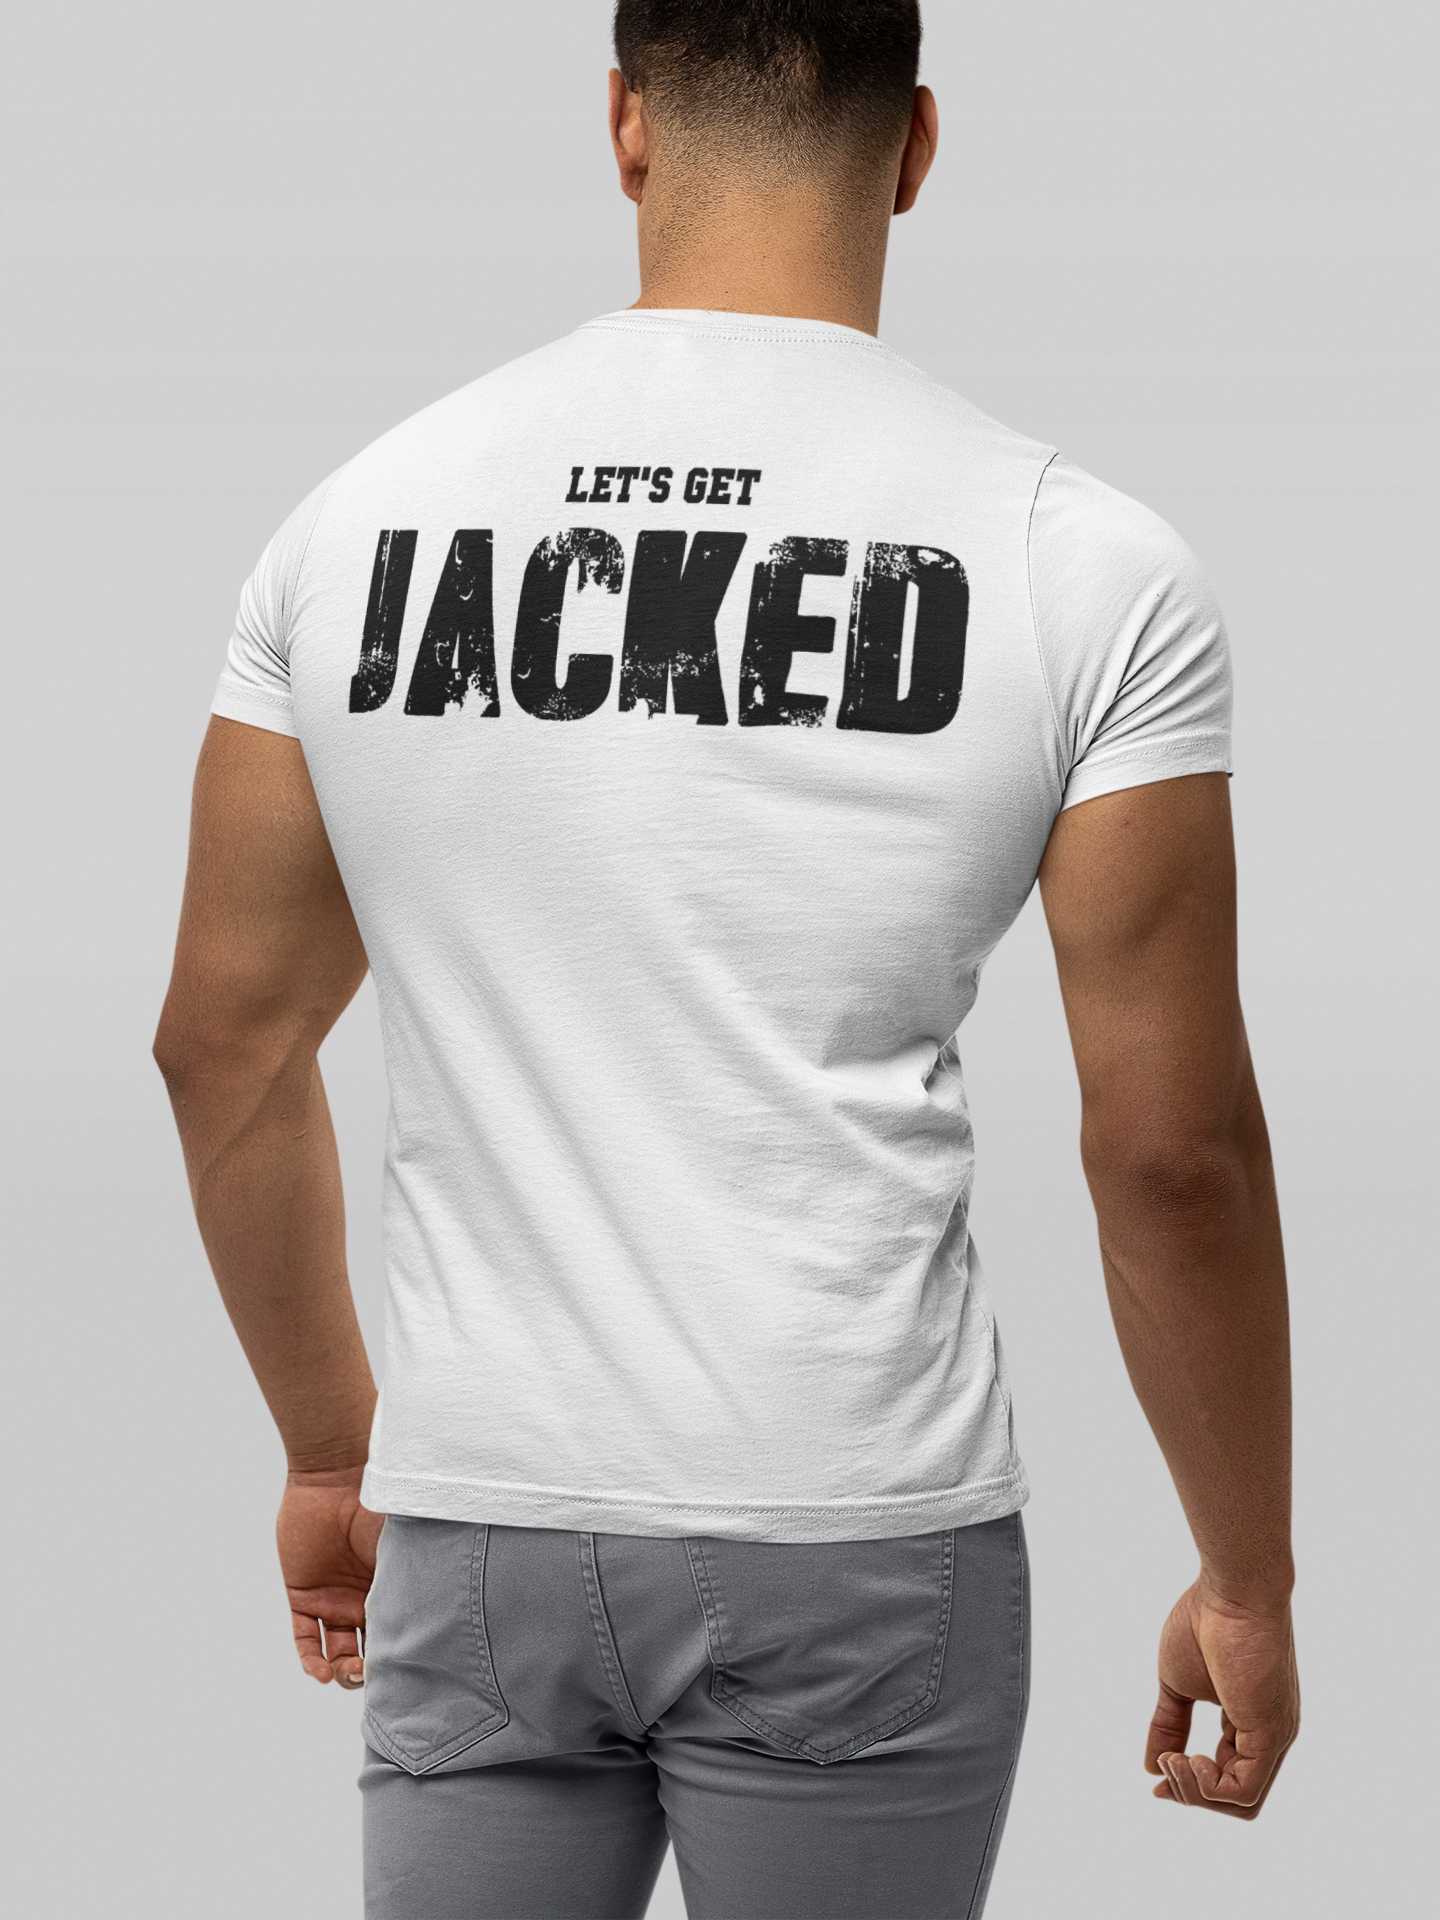 https://strongsoul.in/cdn/shop/products/Let-s-Get-Jacked---Gym-TShirt-Strong-Soul-Shirts-_-Tops-1669047672_1445x.jpg?v=1669047673